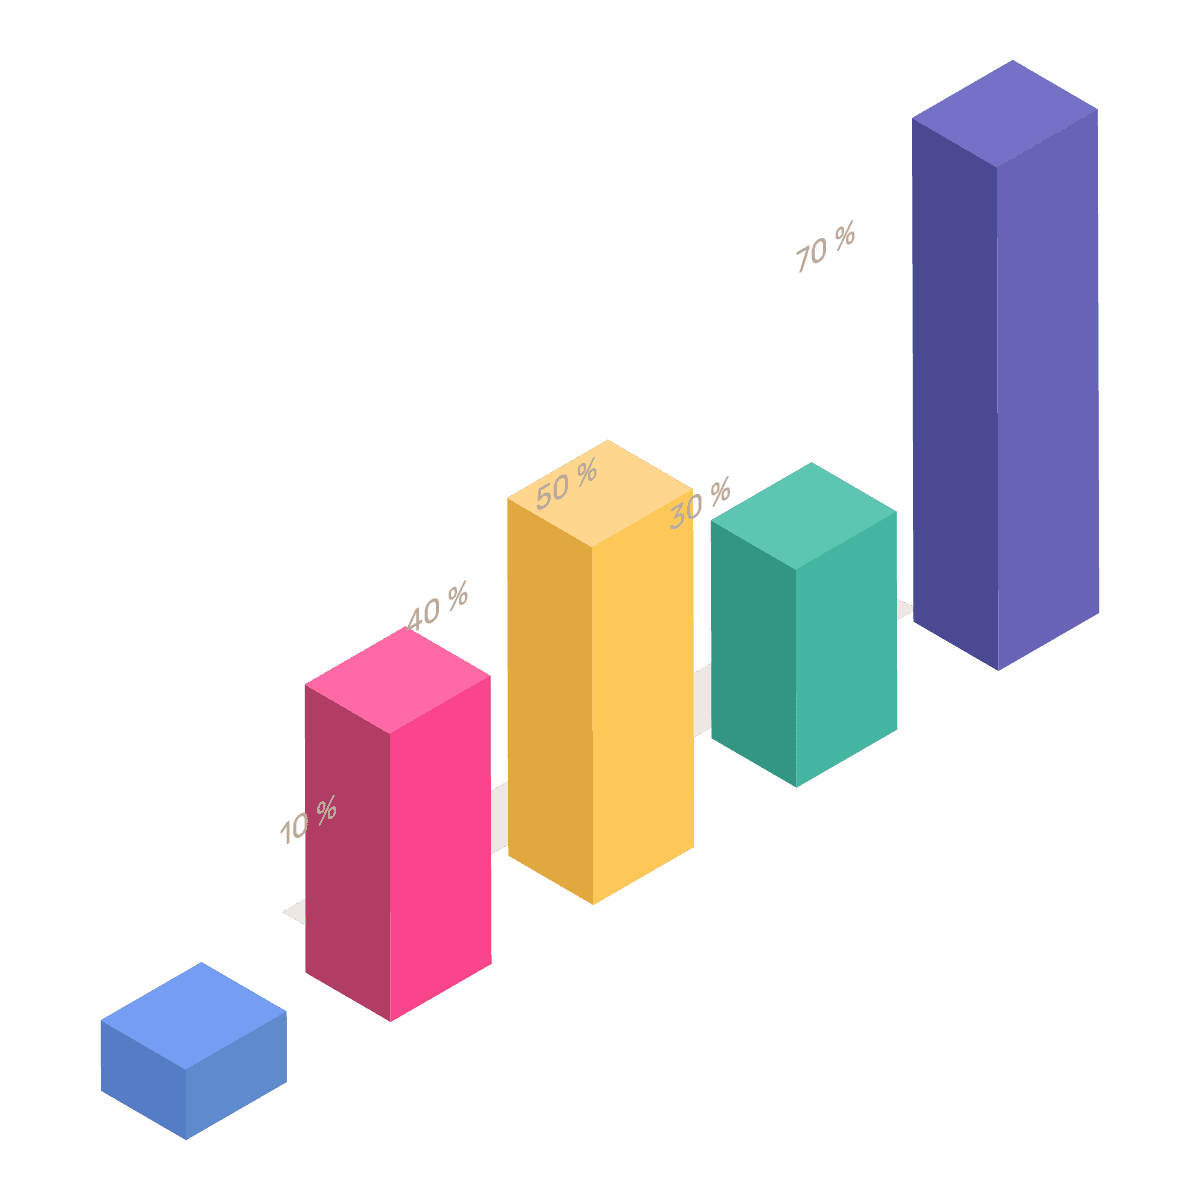 isometric charts and graphs data visualization infographic elements